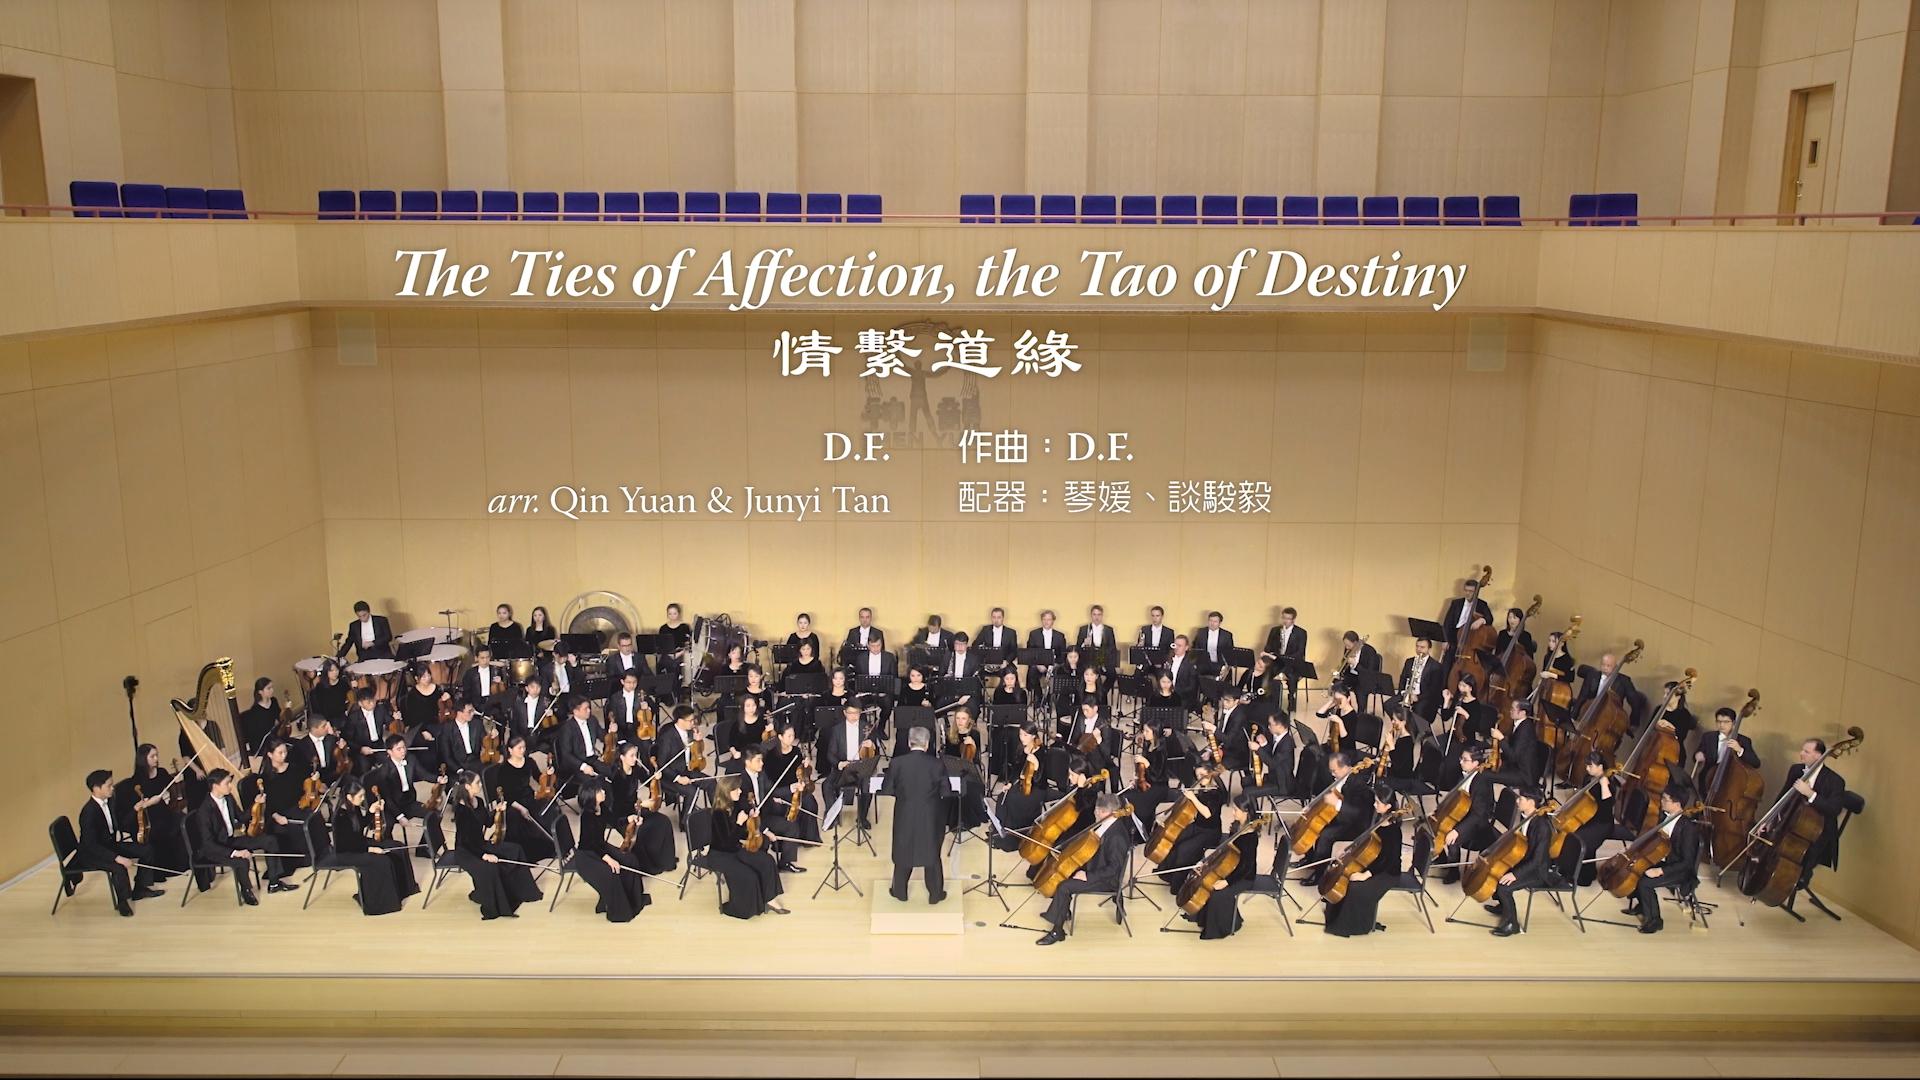 The Ties of Affection, the Tao of Destiny - 2019 Shen Yun Symphony Orchestra